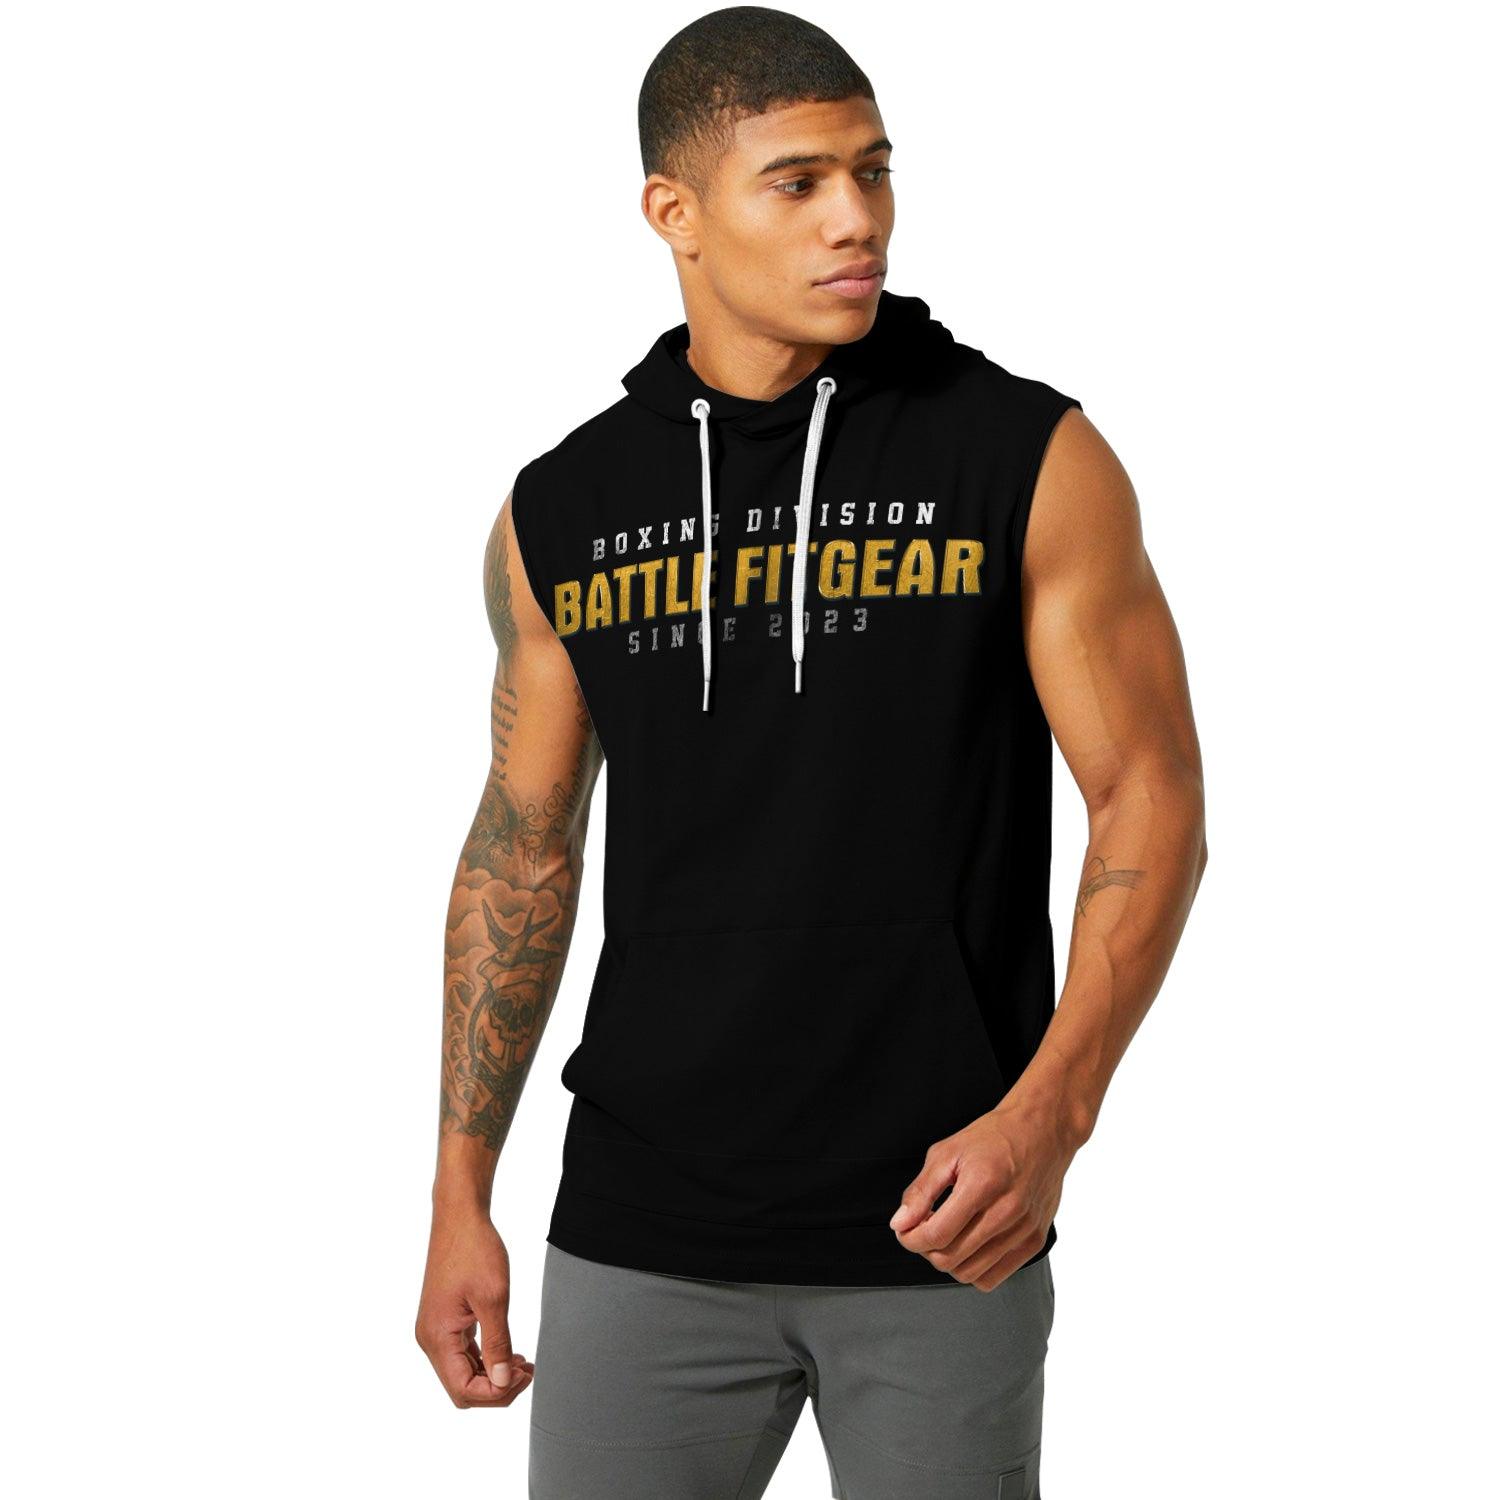 Boxing Division Sleeveless Pullover & Zip Hoodie